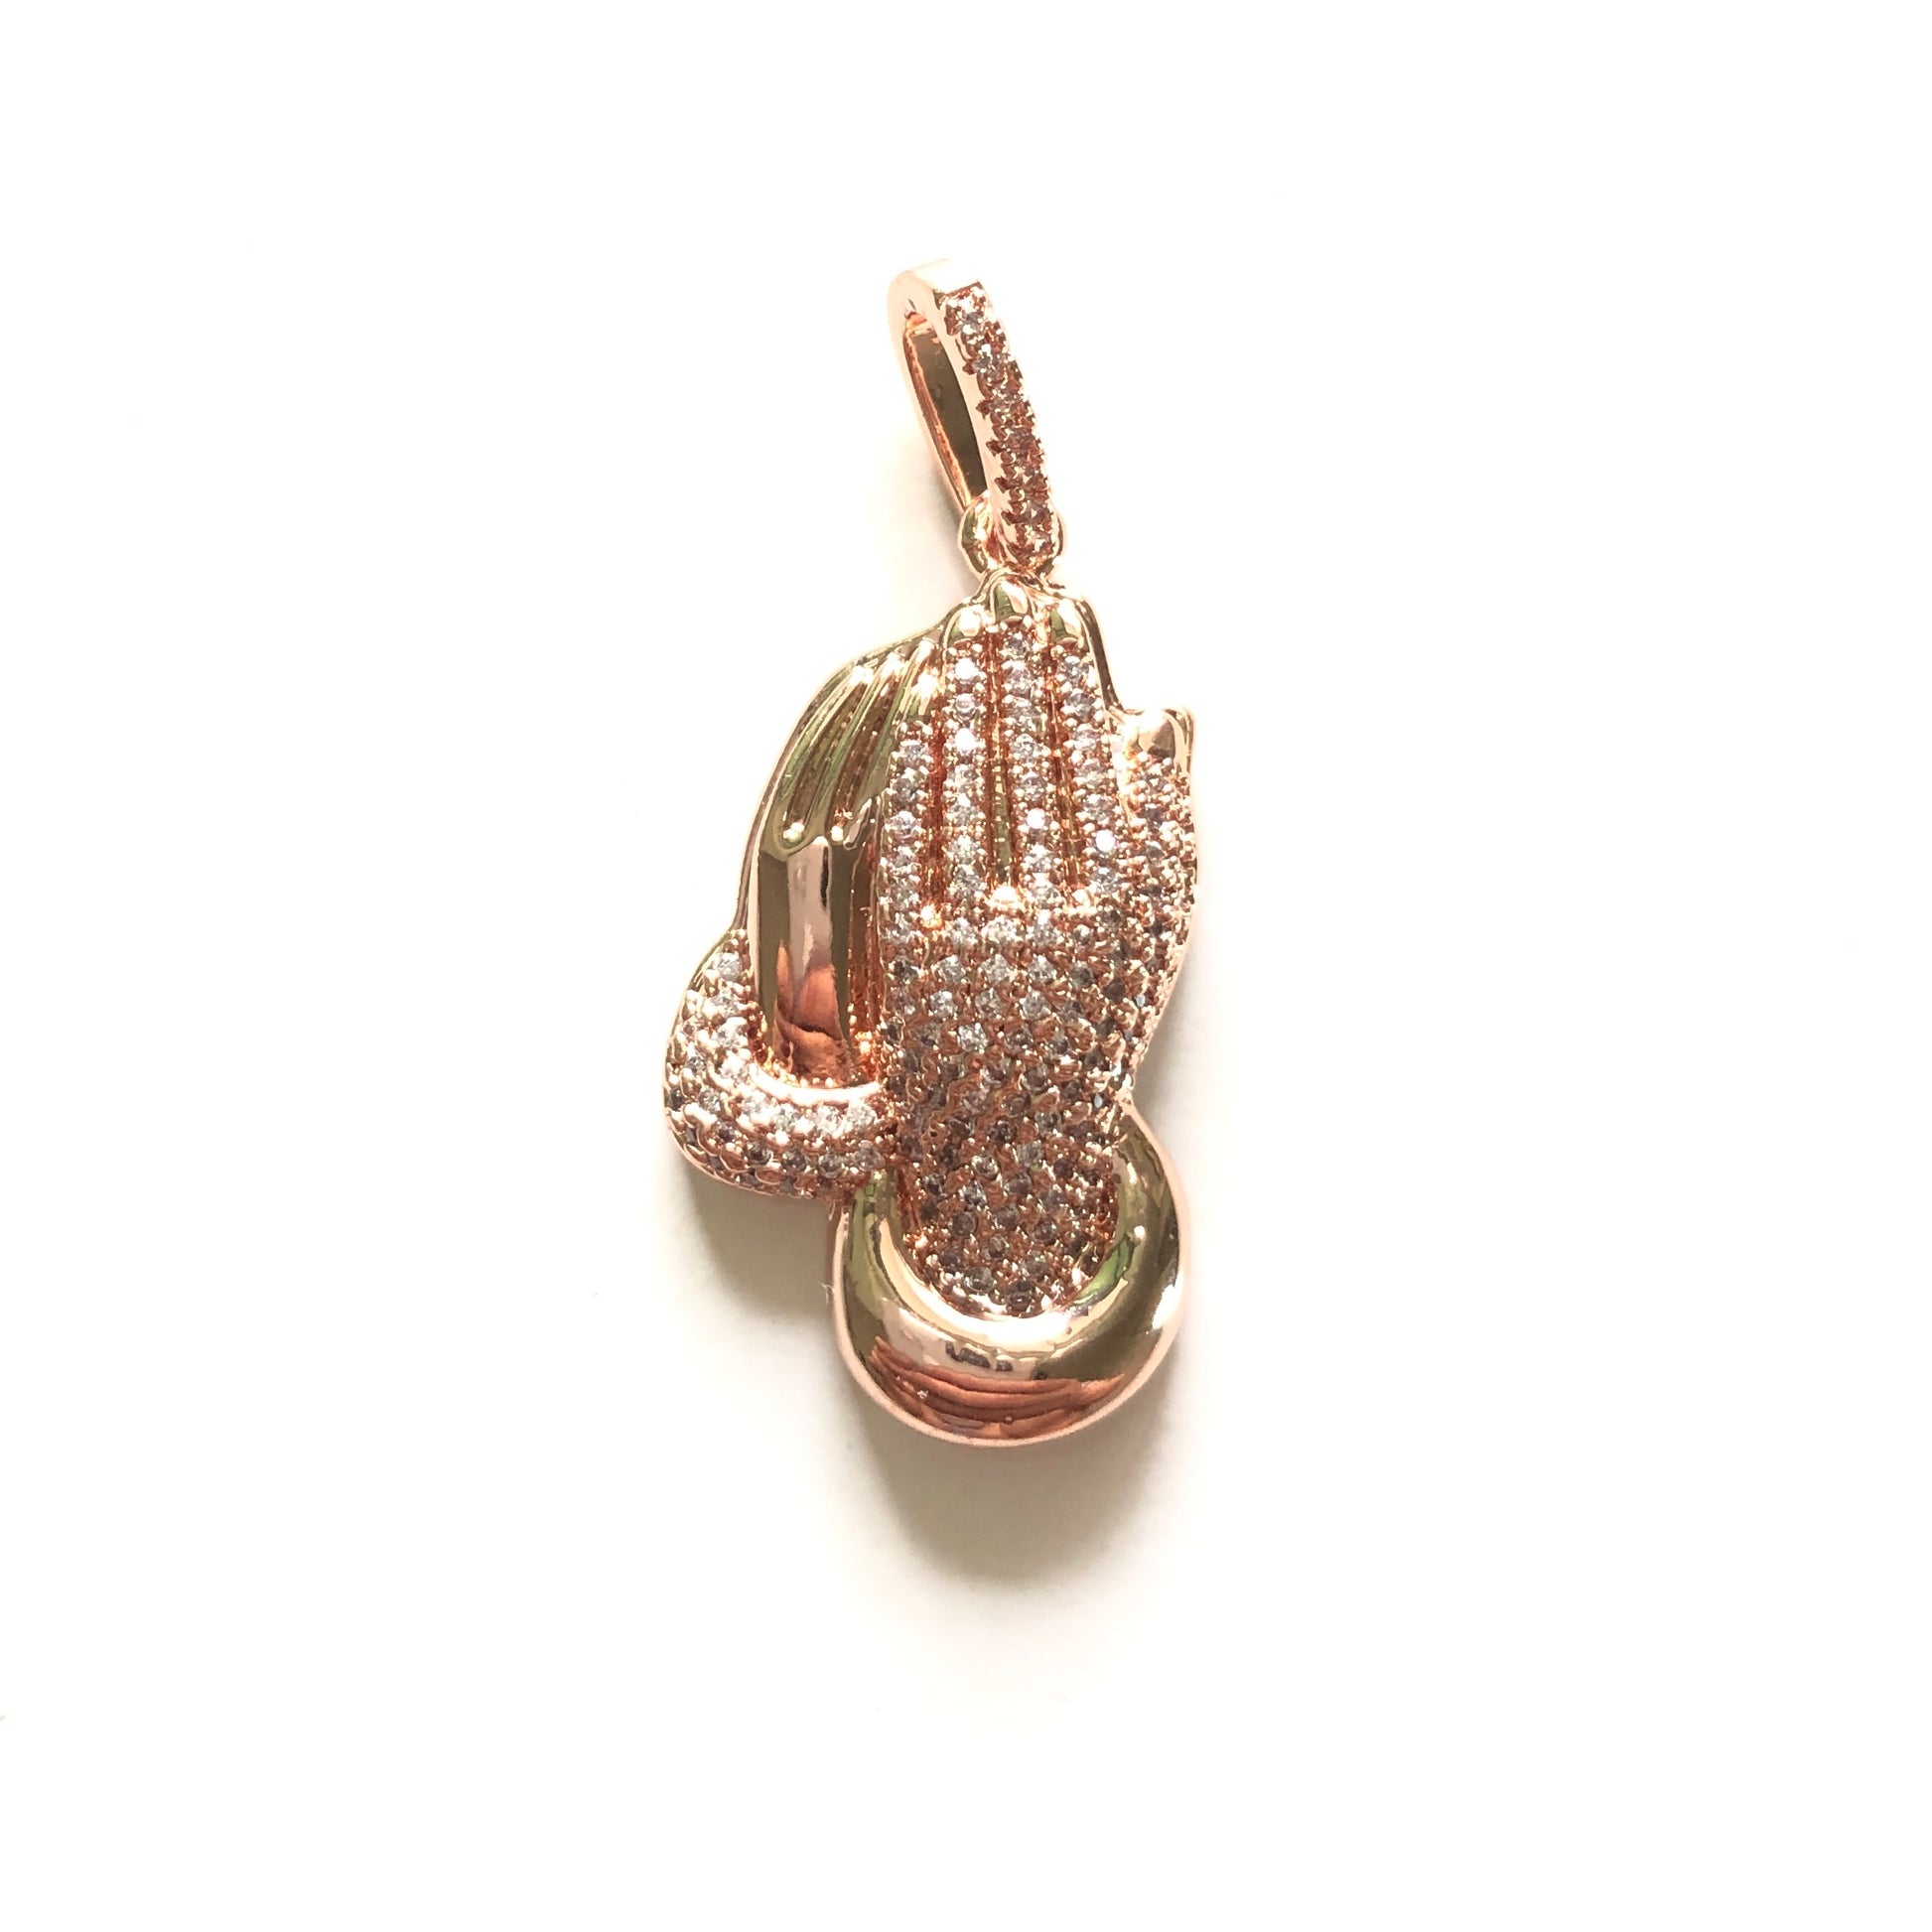 10pcs/lot 31*17mm CZ Paved Praying Hands Charms Rose Gold CZ Paved Charms Christian Quotes Symbols Charms Beads Beyond